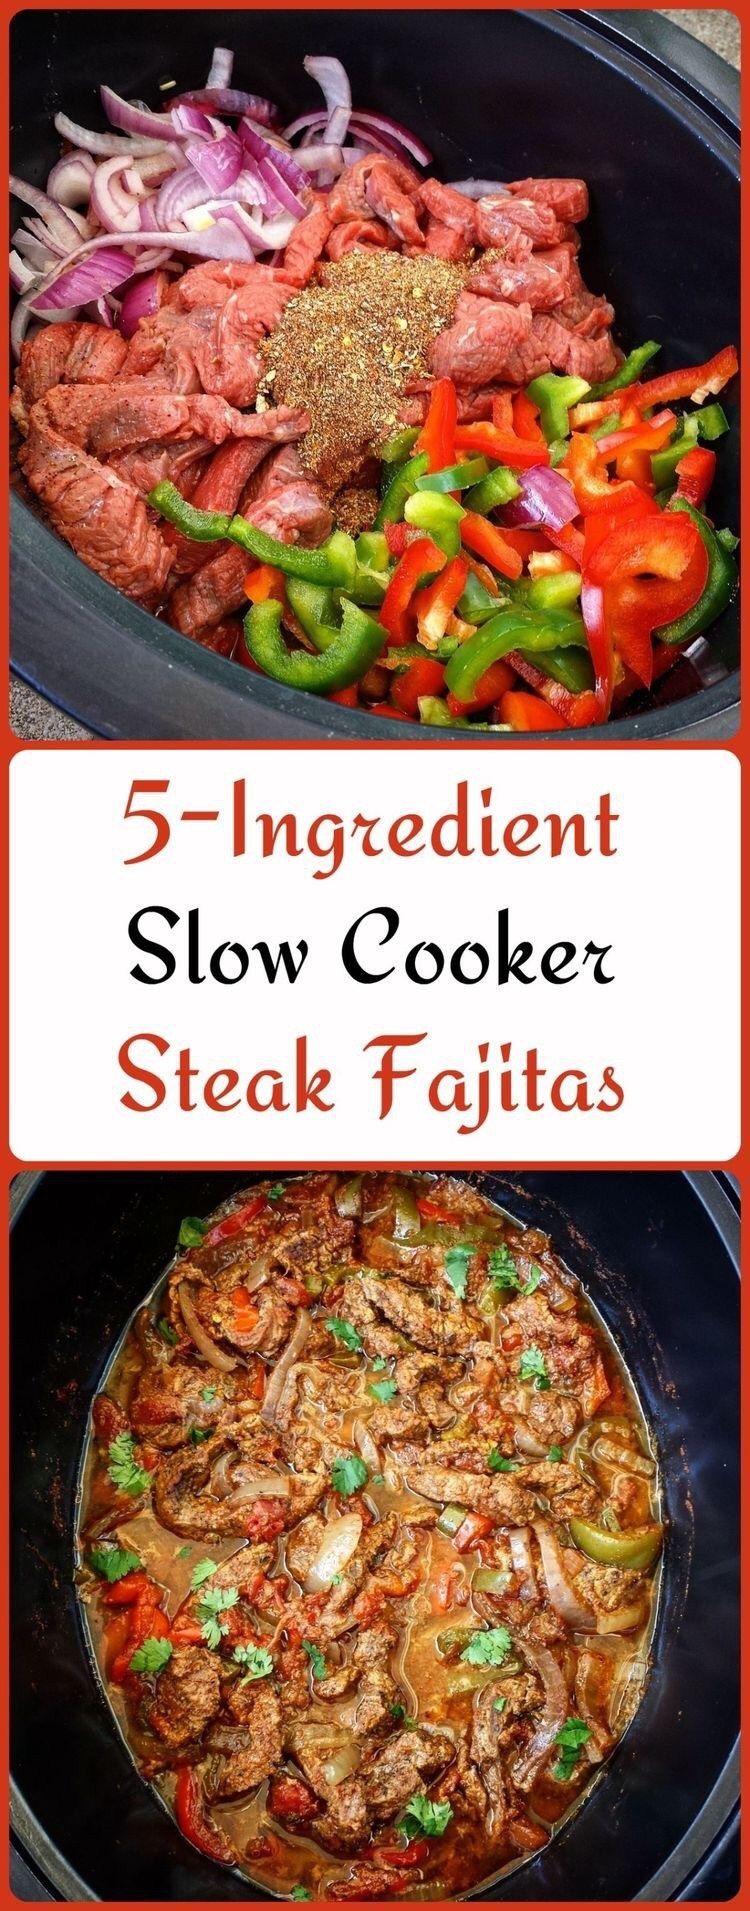 16 Slow Cooker Carnivore Recipes -   7 healthy recipes Beef steak ideas